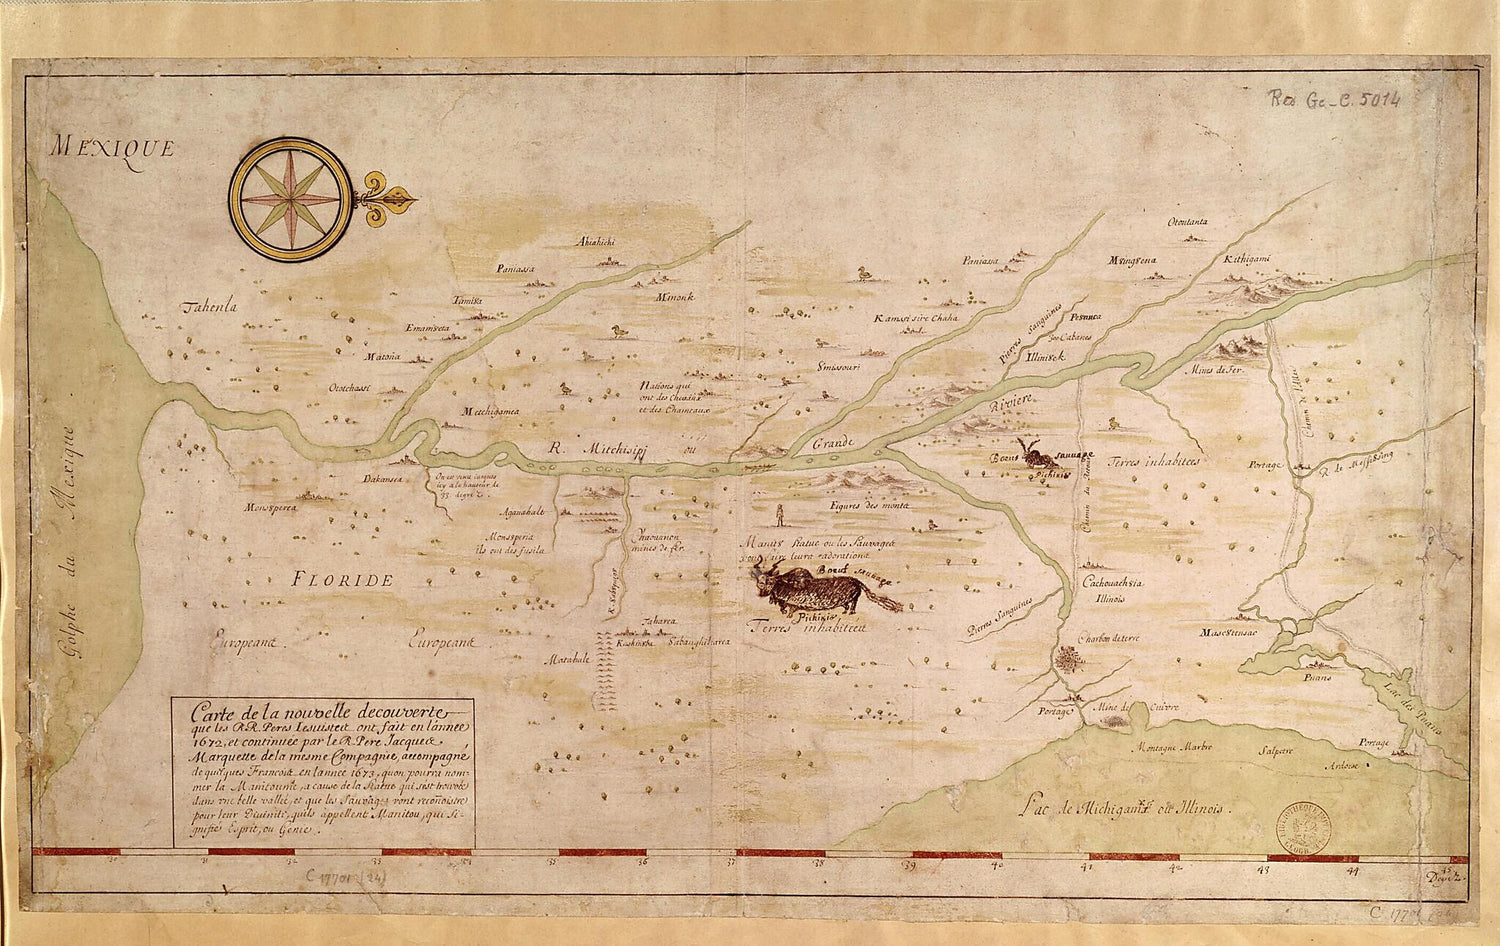 This old map of Map of the New Discovery Made by the Jesuit Fathers In 1672 and Continued by Father Jacques Marquette, from the Same Group, Accompanied by a Few Frenchmen In the Year from 1673, Named Manitounie. (Carte De La Nouvelle Découverte Que Les 